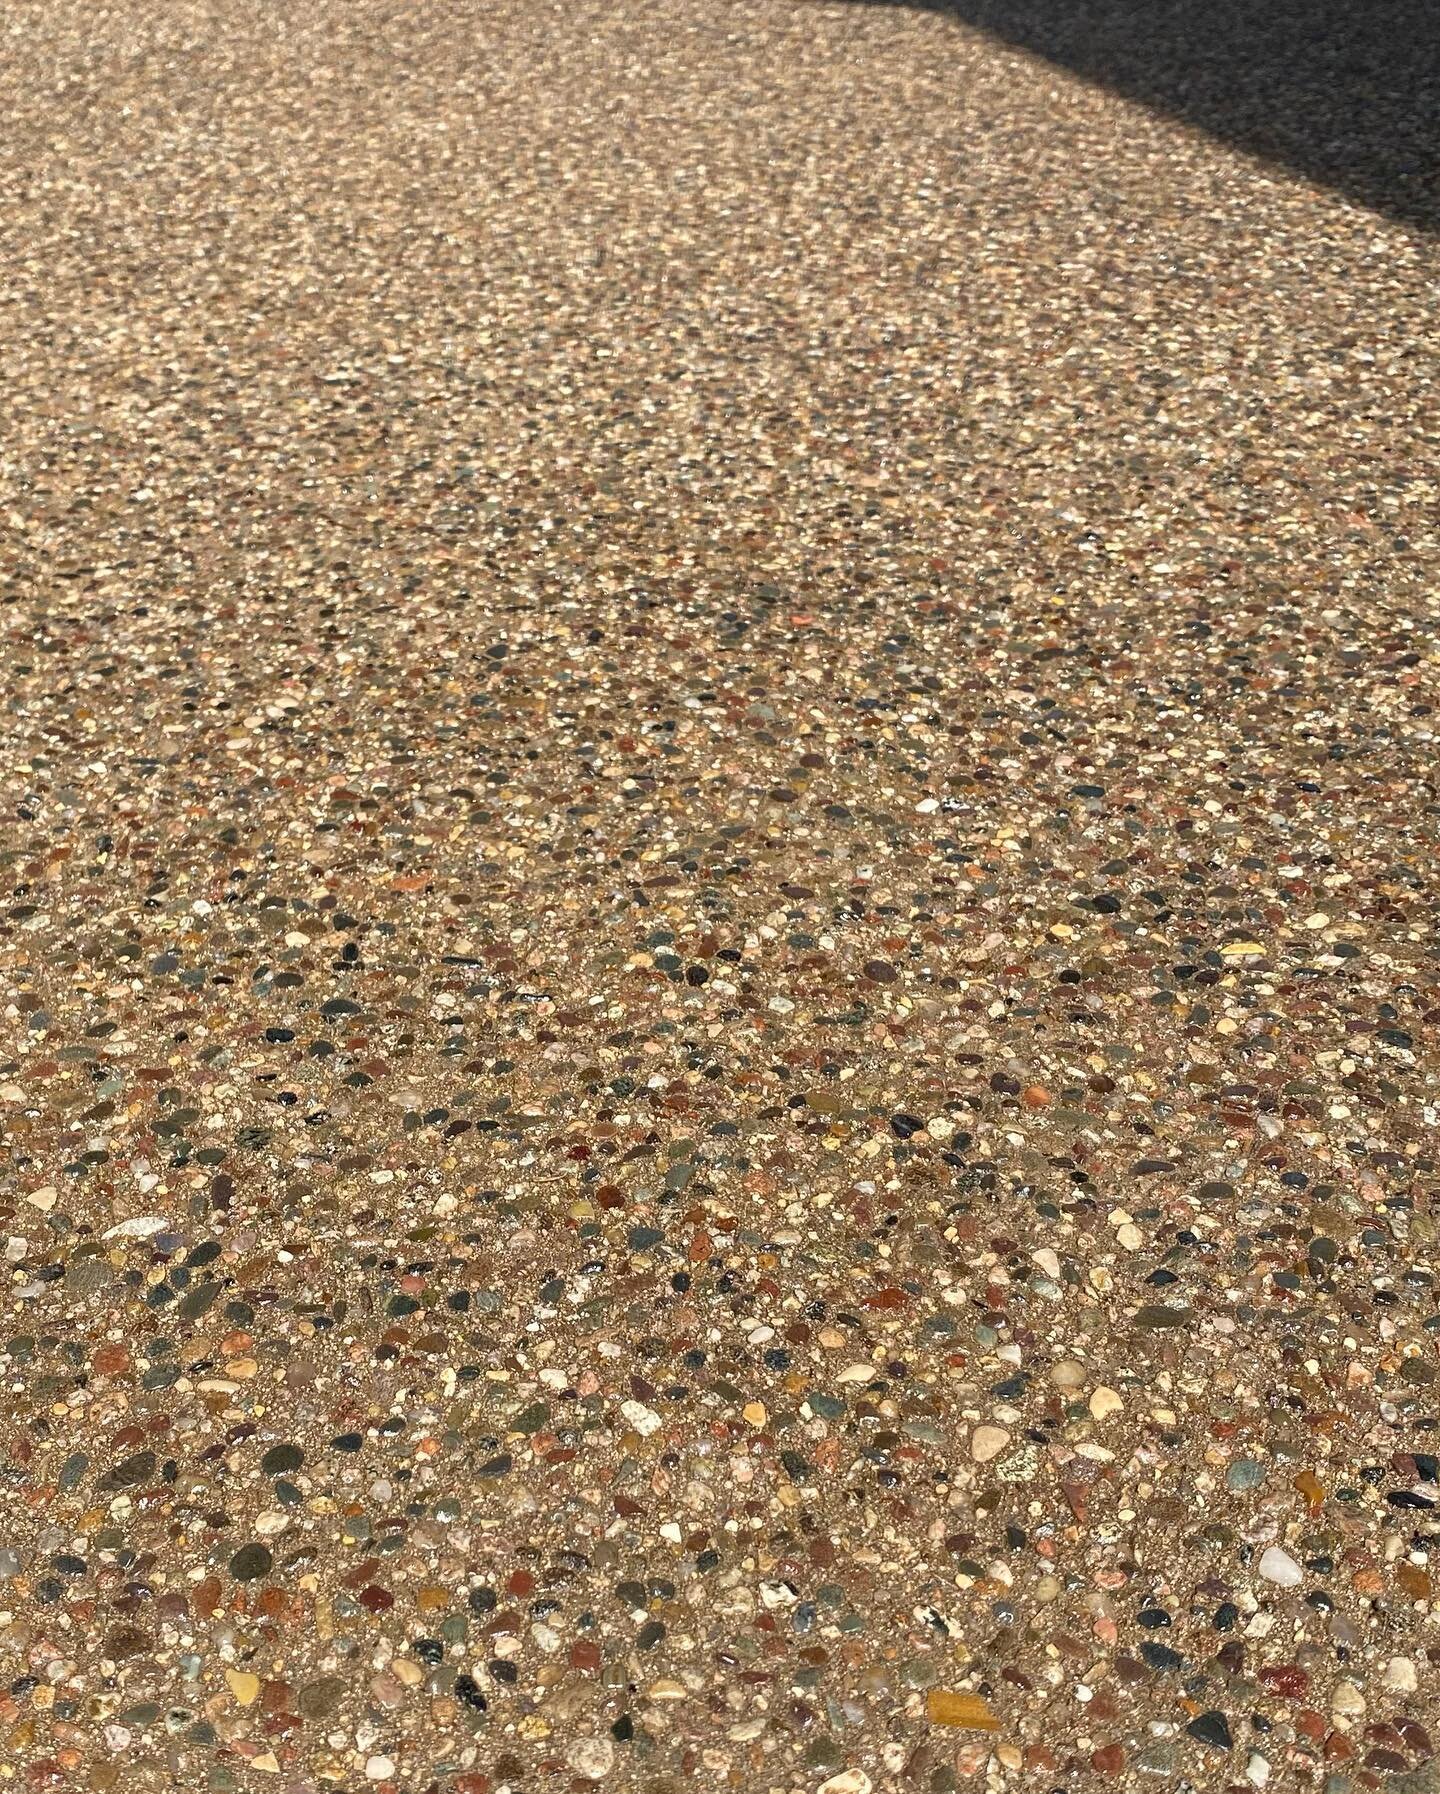 Integral colored exposed aggregate is a classic look.  Decocrete cochella sand with number 4 deactivator.